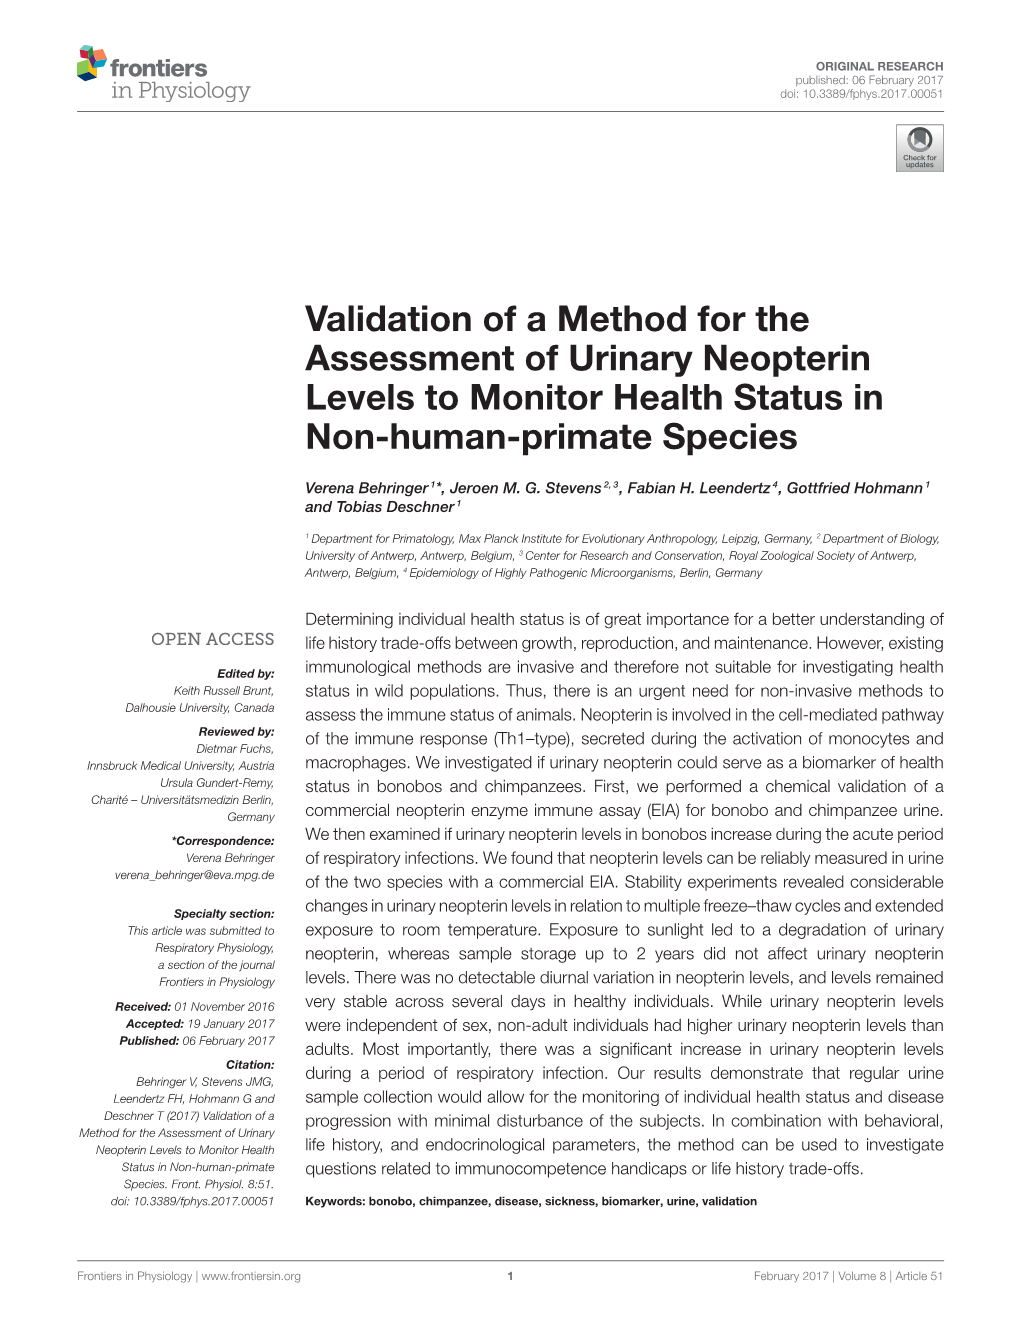 Validation of a Method for the Assessment of Urinary Neopterin Levels to Monitor Health Status in Non-Human-Primate Species